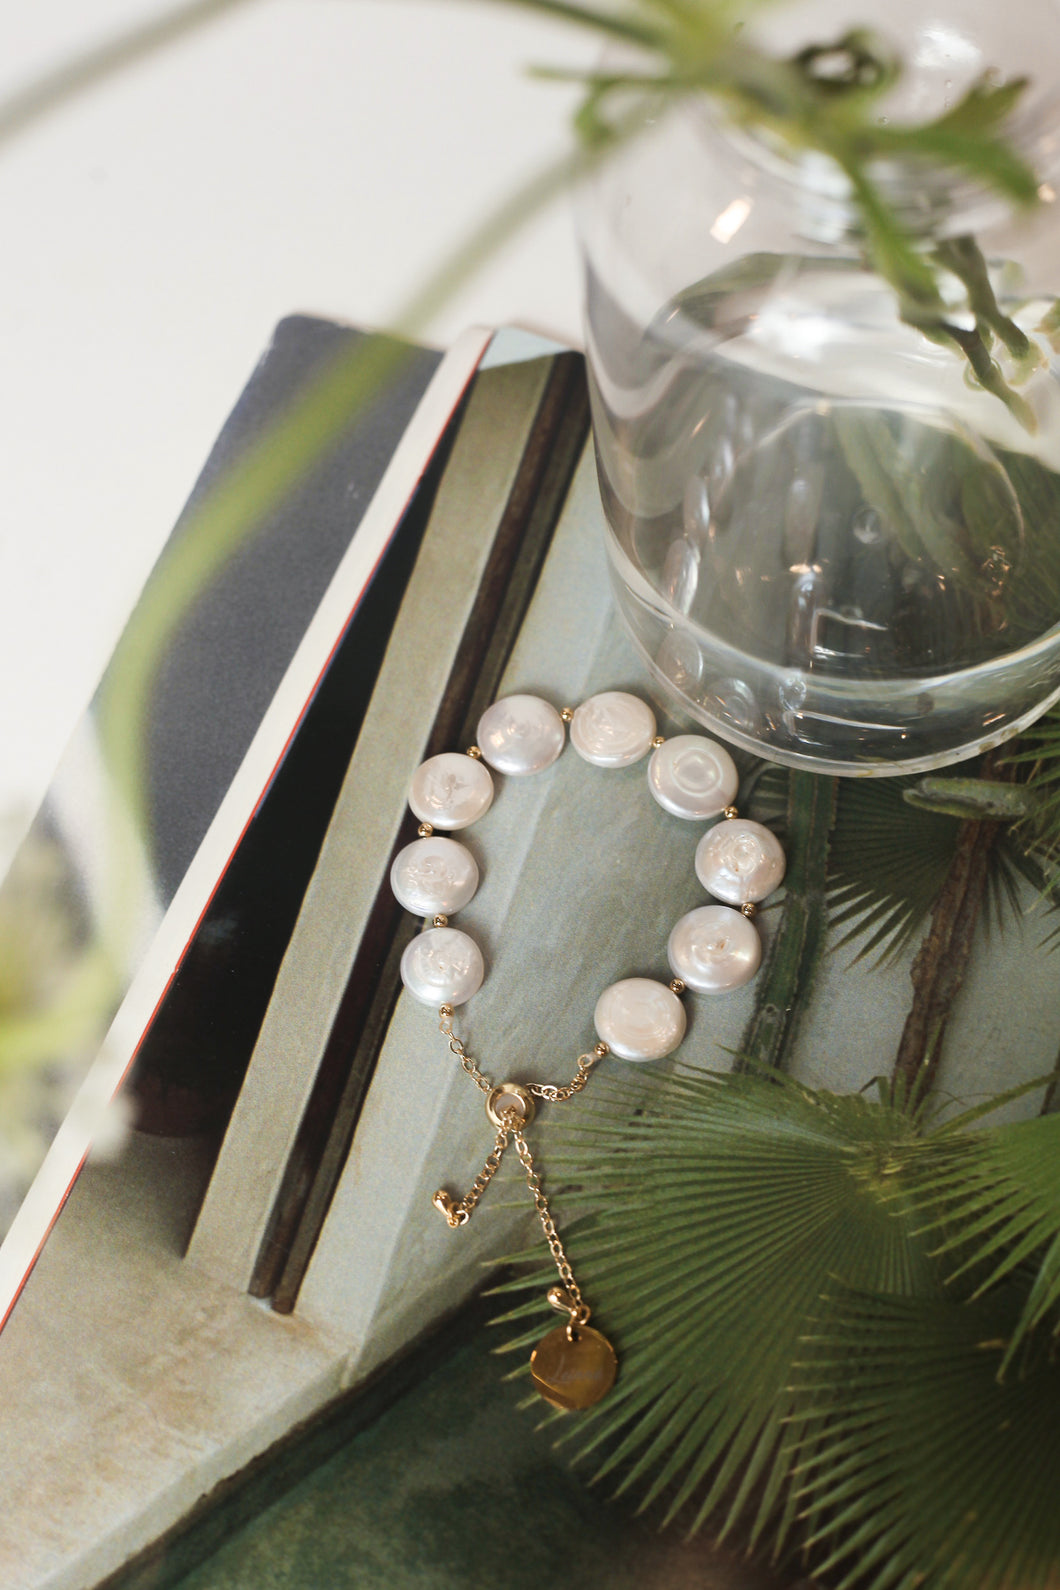 A pearl bracelet on a shell on a table photo – Accesories Image on Unsplash